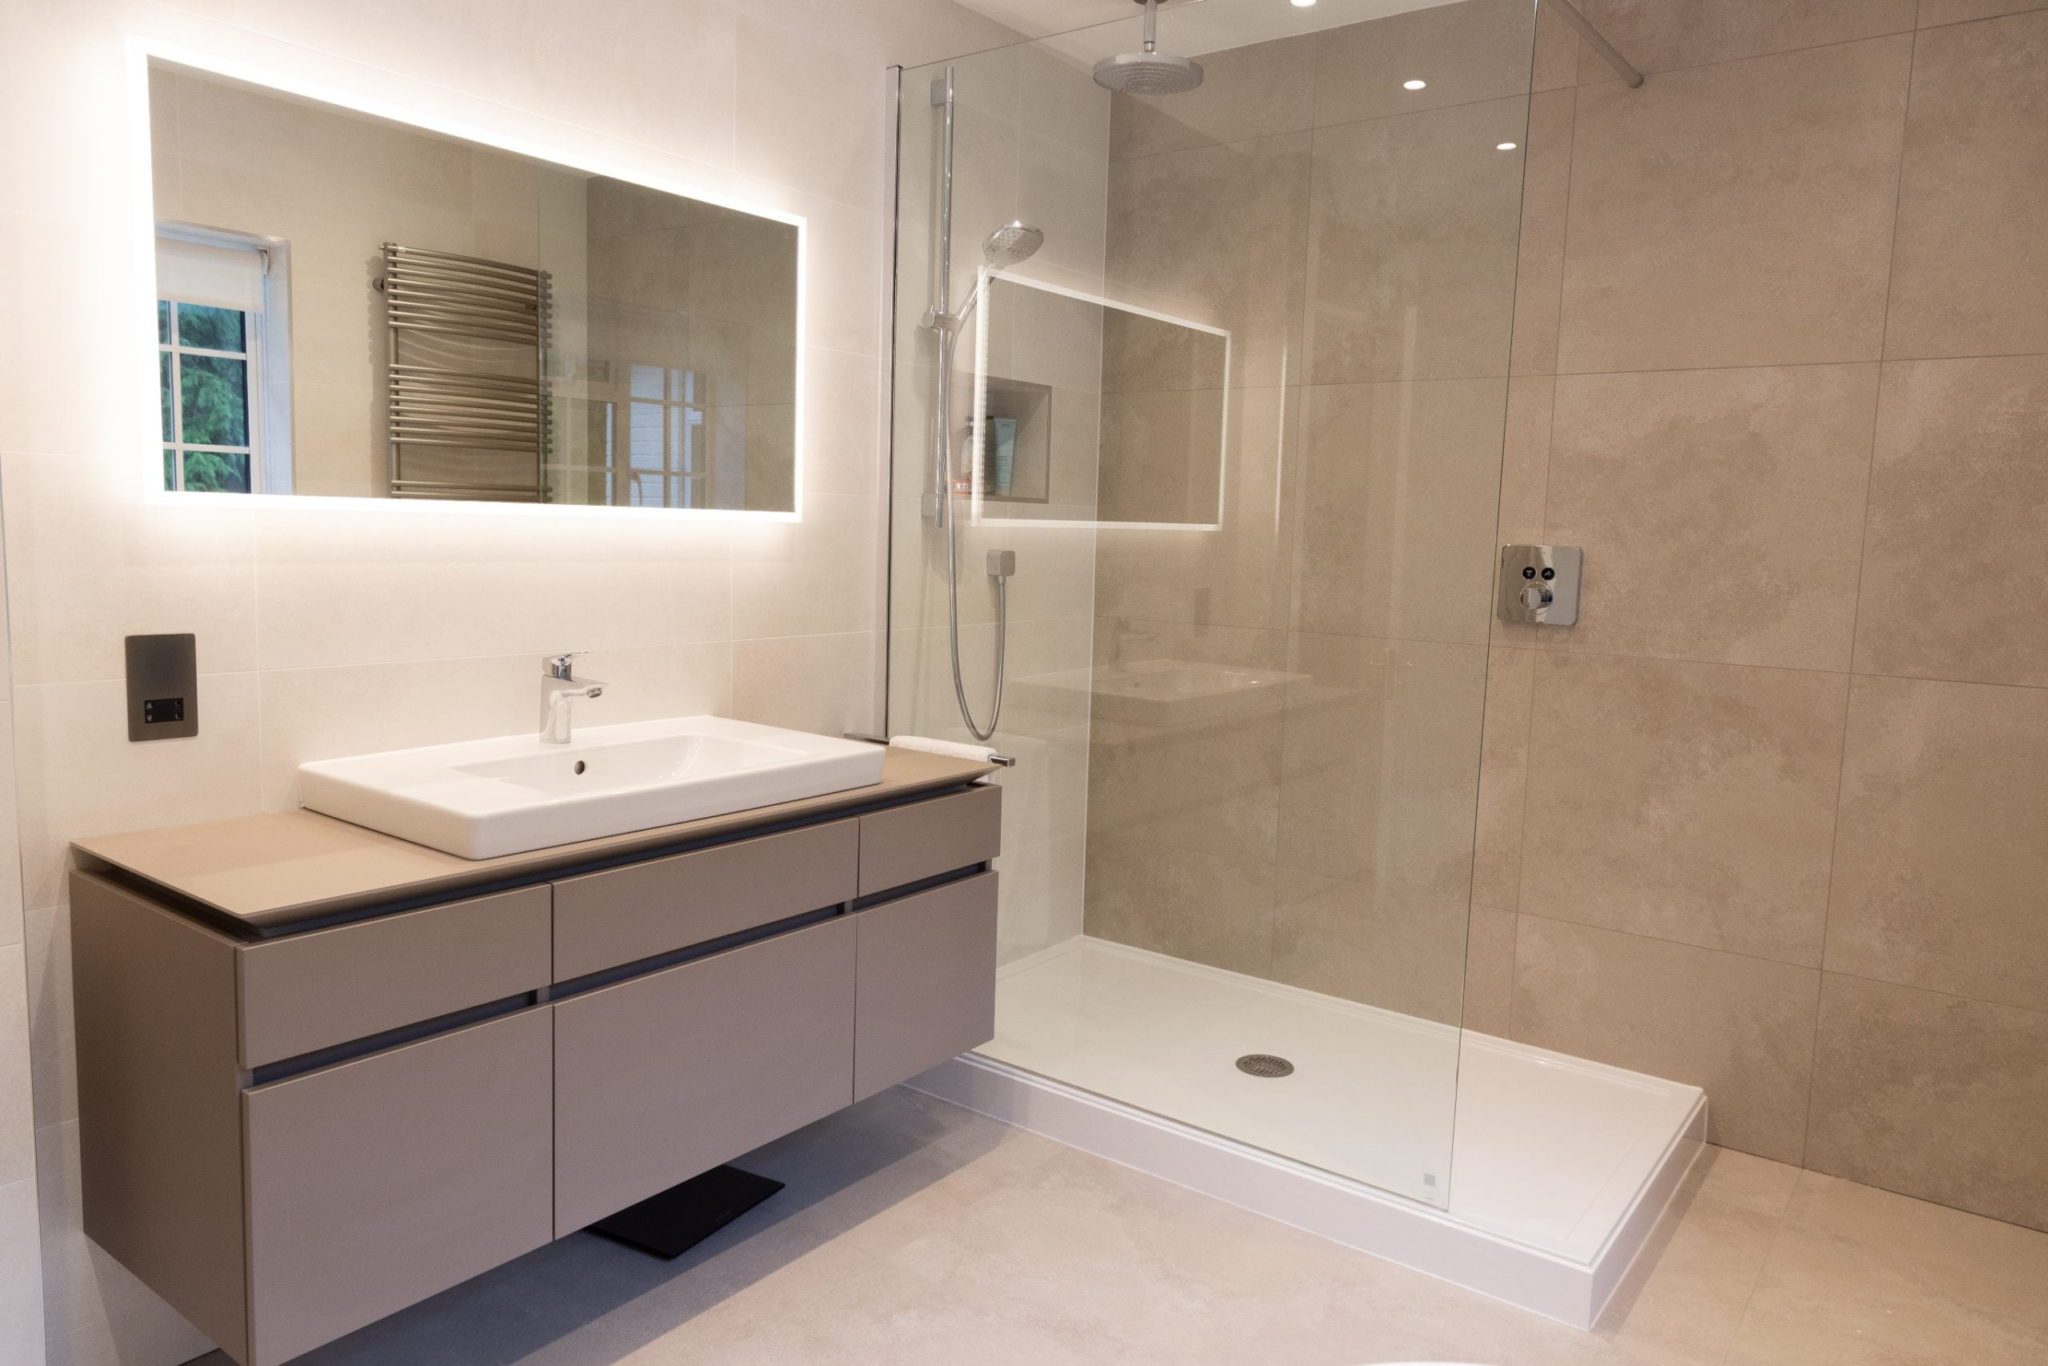 redesign and refurbishment of bathrooms and cloakrooms